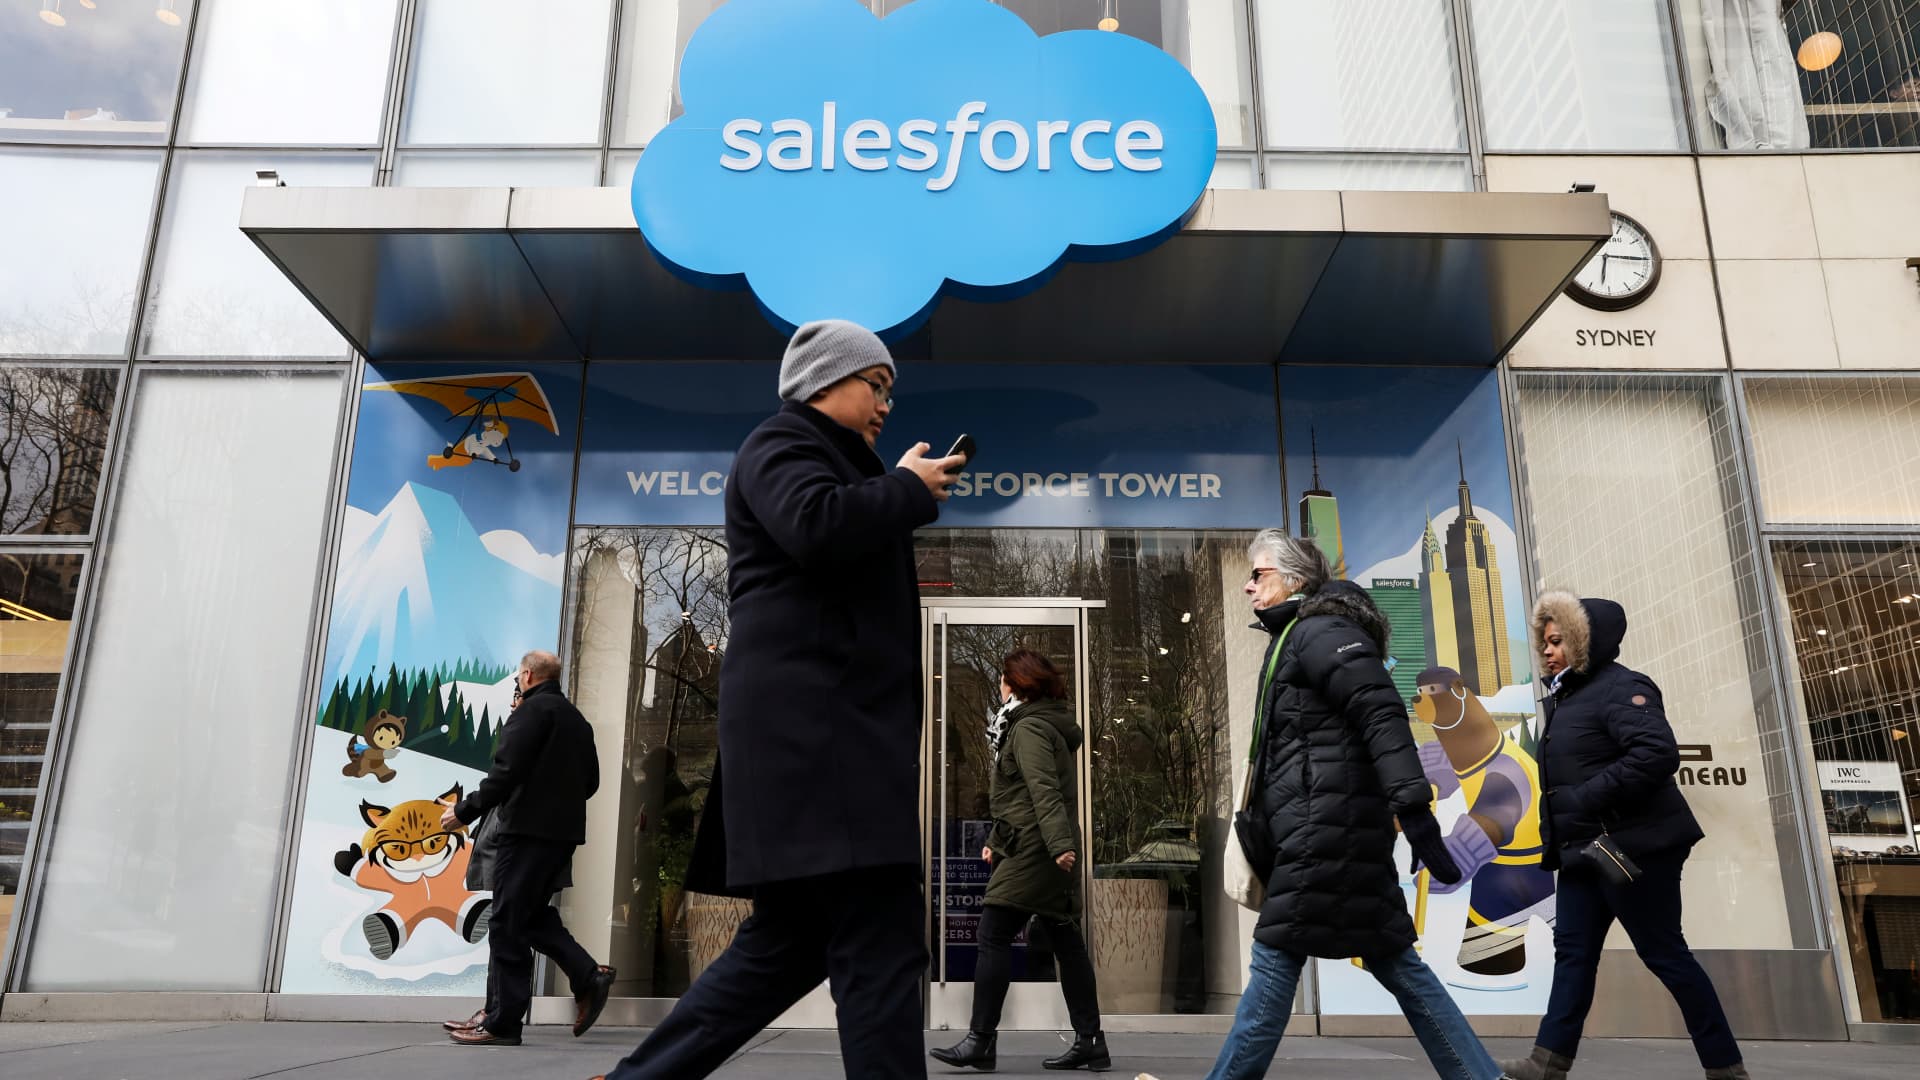 Salesforce drops after reports it is in talks to assemble Informatica